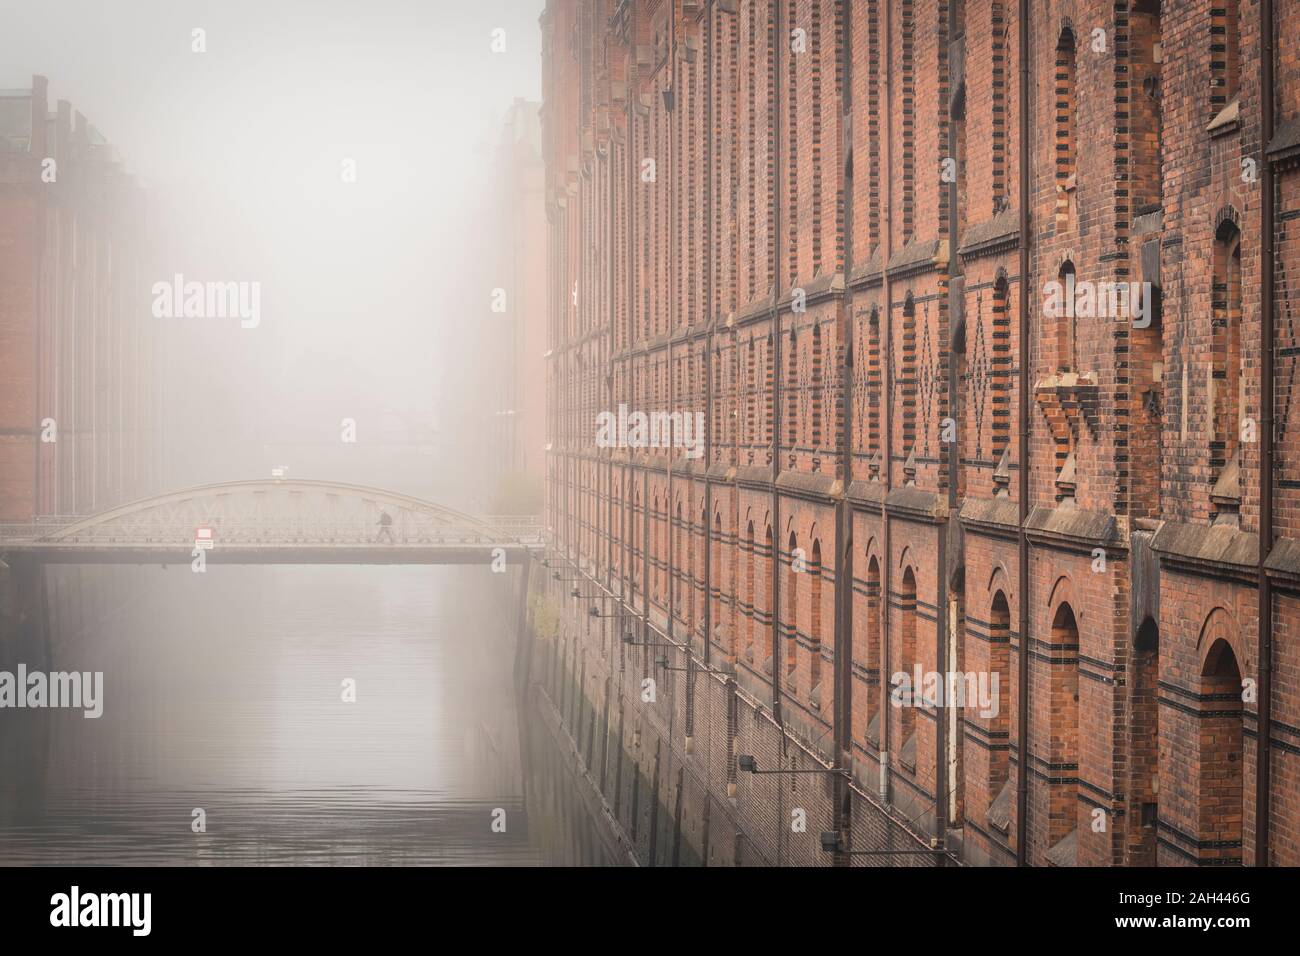 Germany, Hamburg, Speicherstadt, Building and footbridge over canal in fog Stock Photo